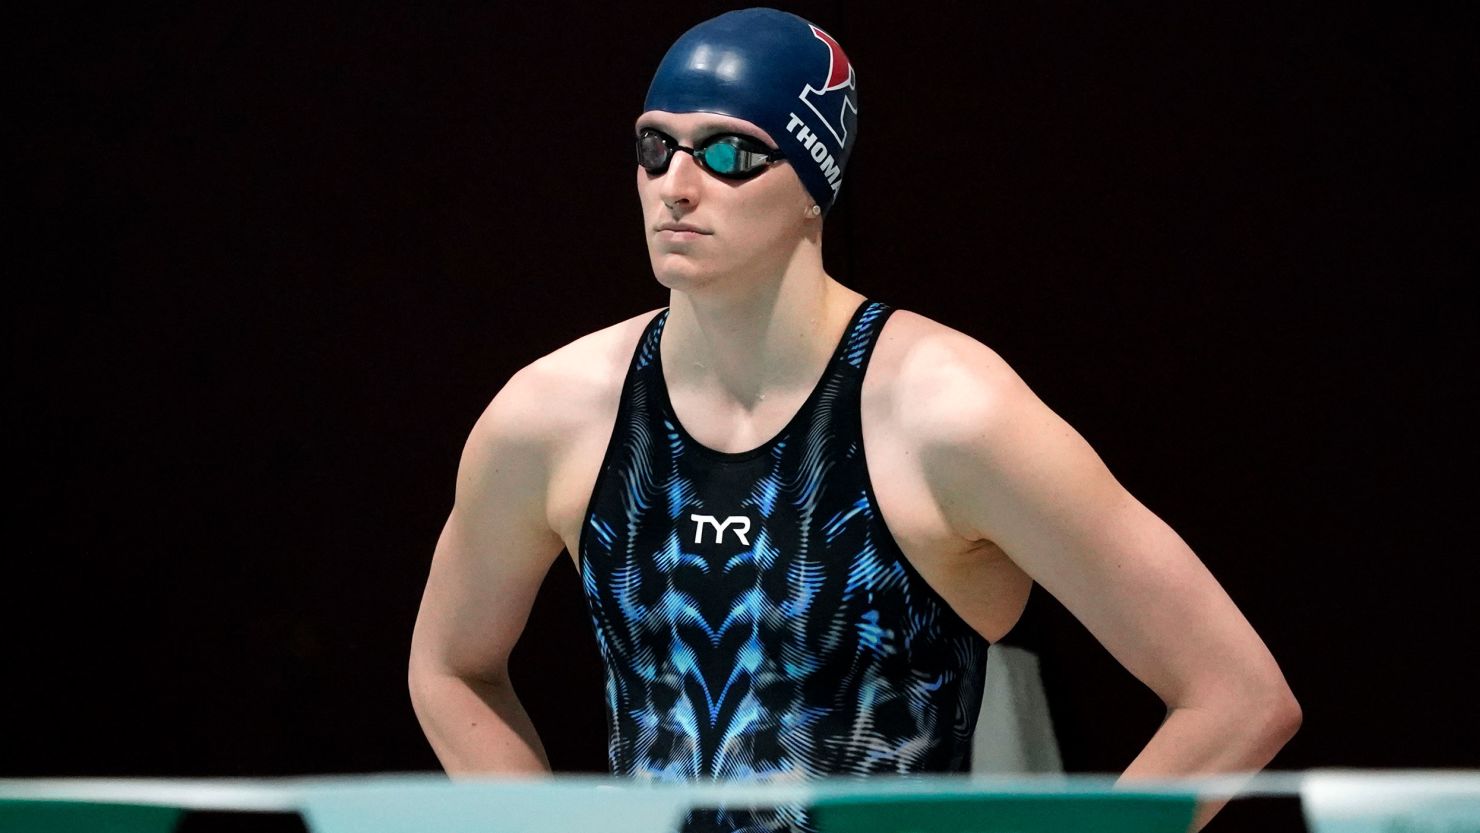 How an Ivy League swimmer became the face of the debate on